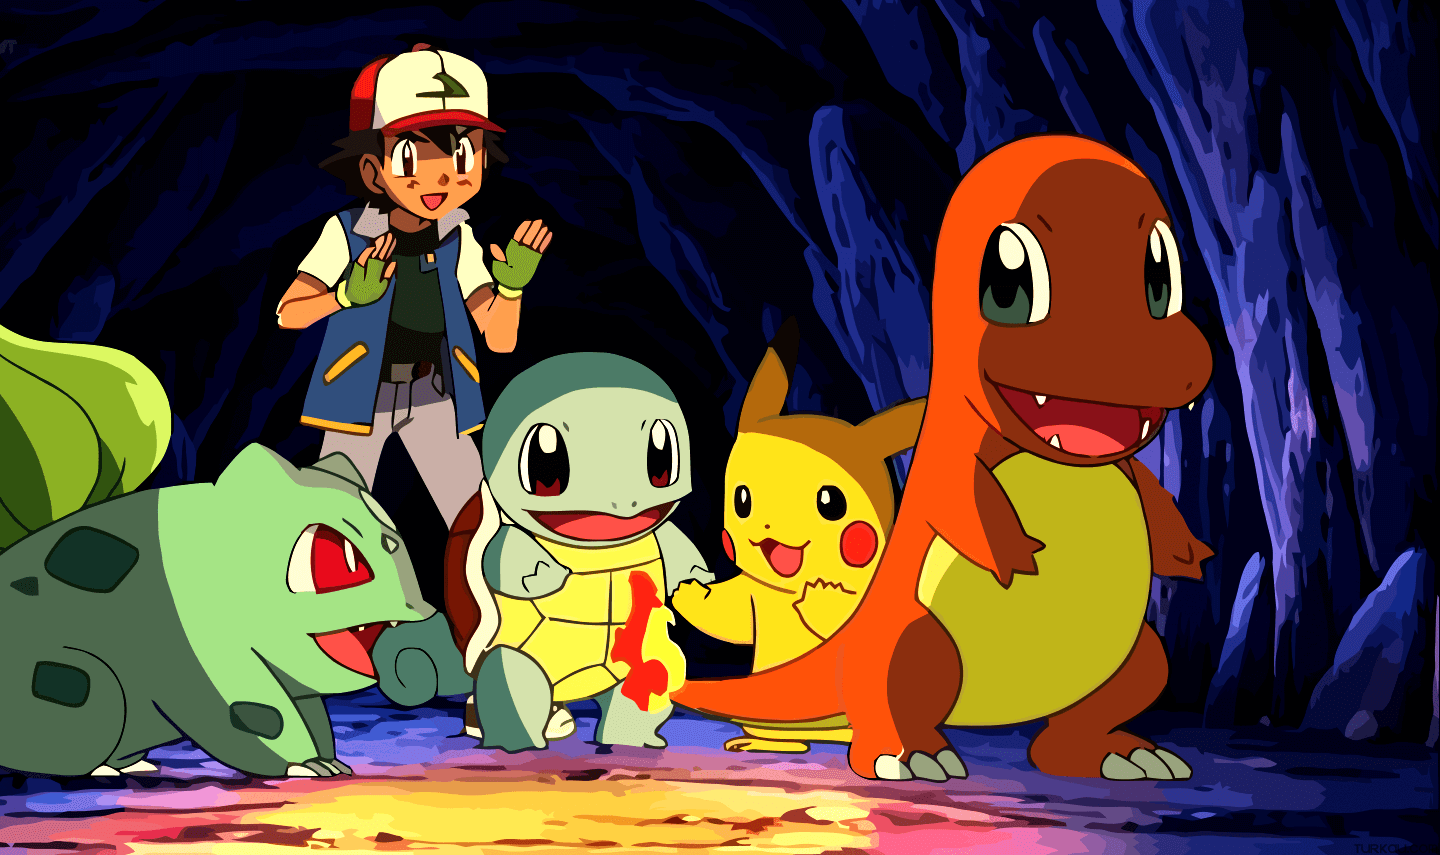 Pokemon characters are standing in front of a cave. - Pokemon